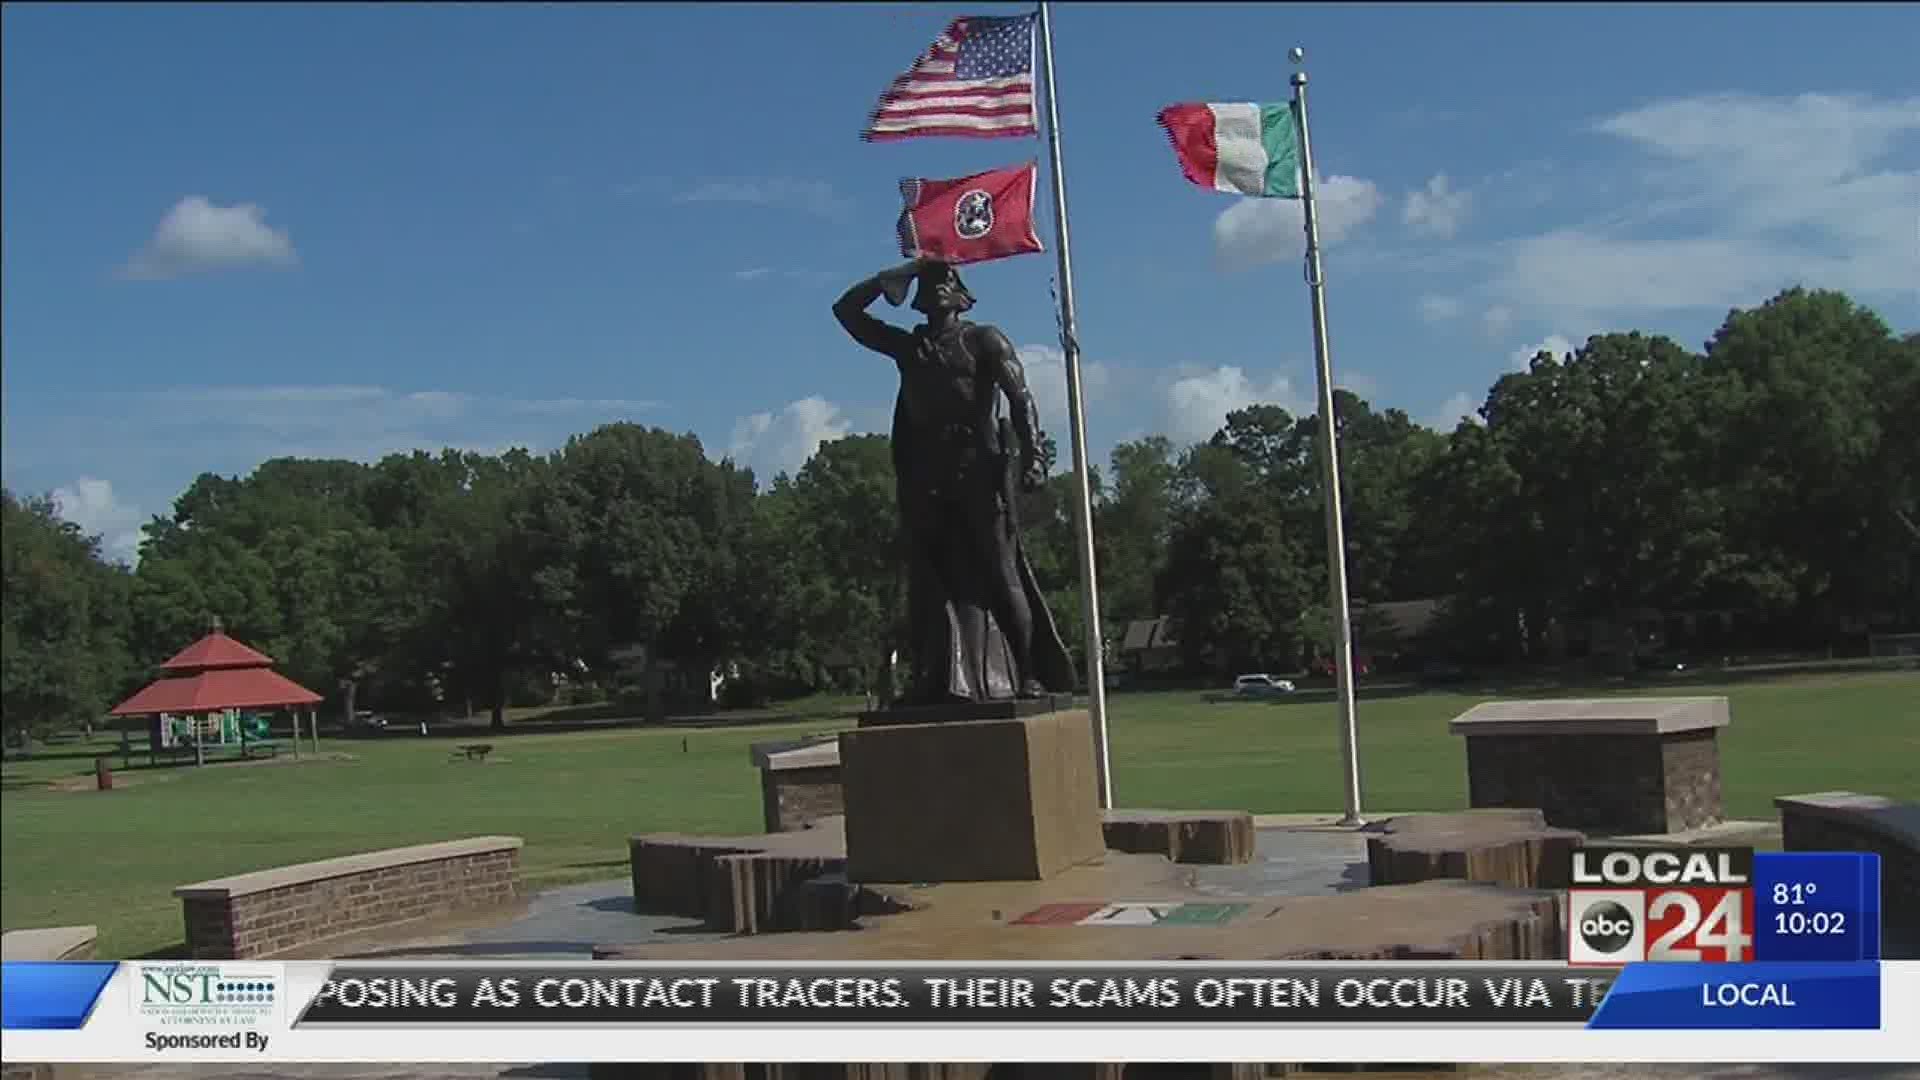 The statue at Marquette Park has been vandalized at least twice in the last few weeks.